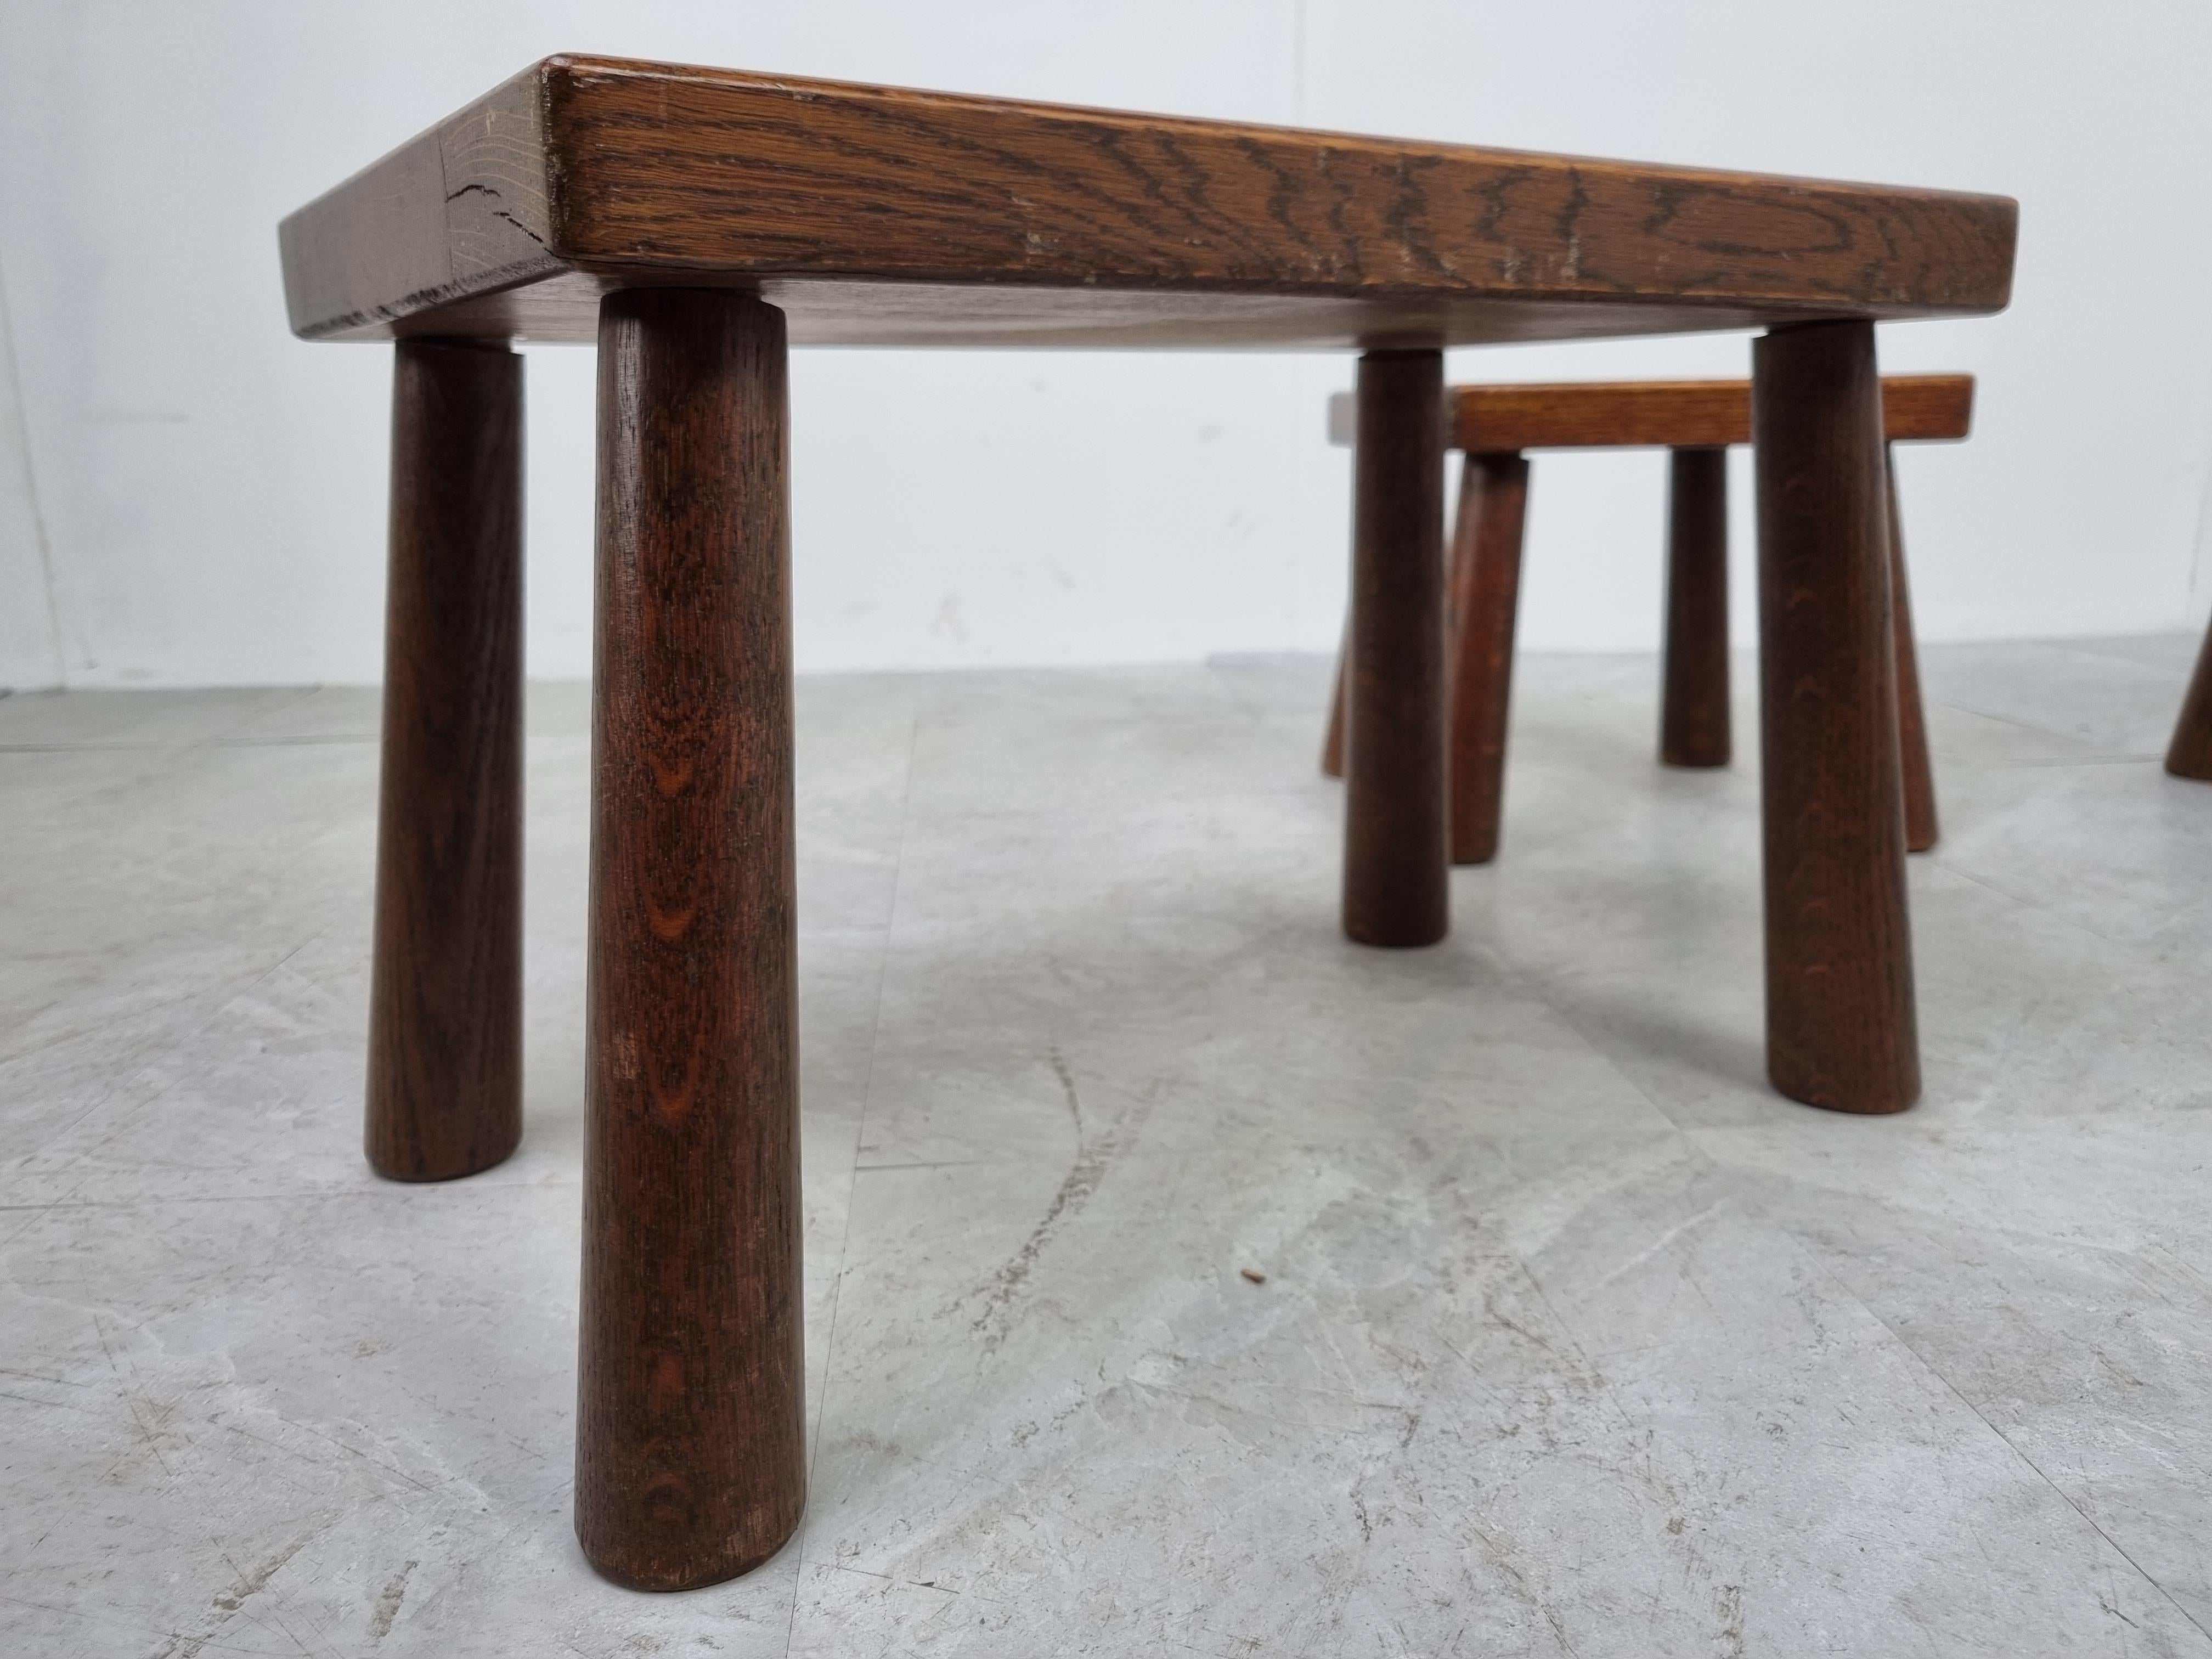 Lovely set of brutalist oak nesting tables.

Primitive and robuste design.

1960s - Belgium

Good condition

Dimensions of the largest table:

Height: 37cm/14.56